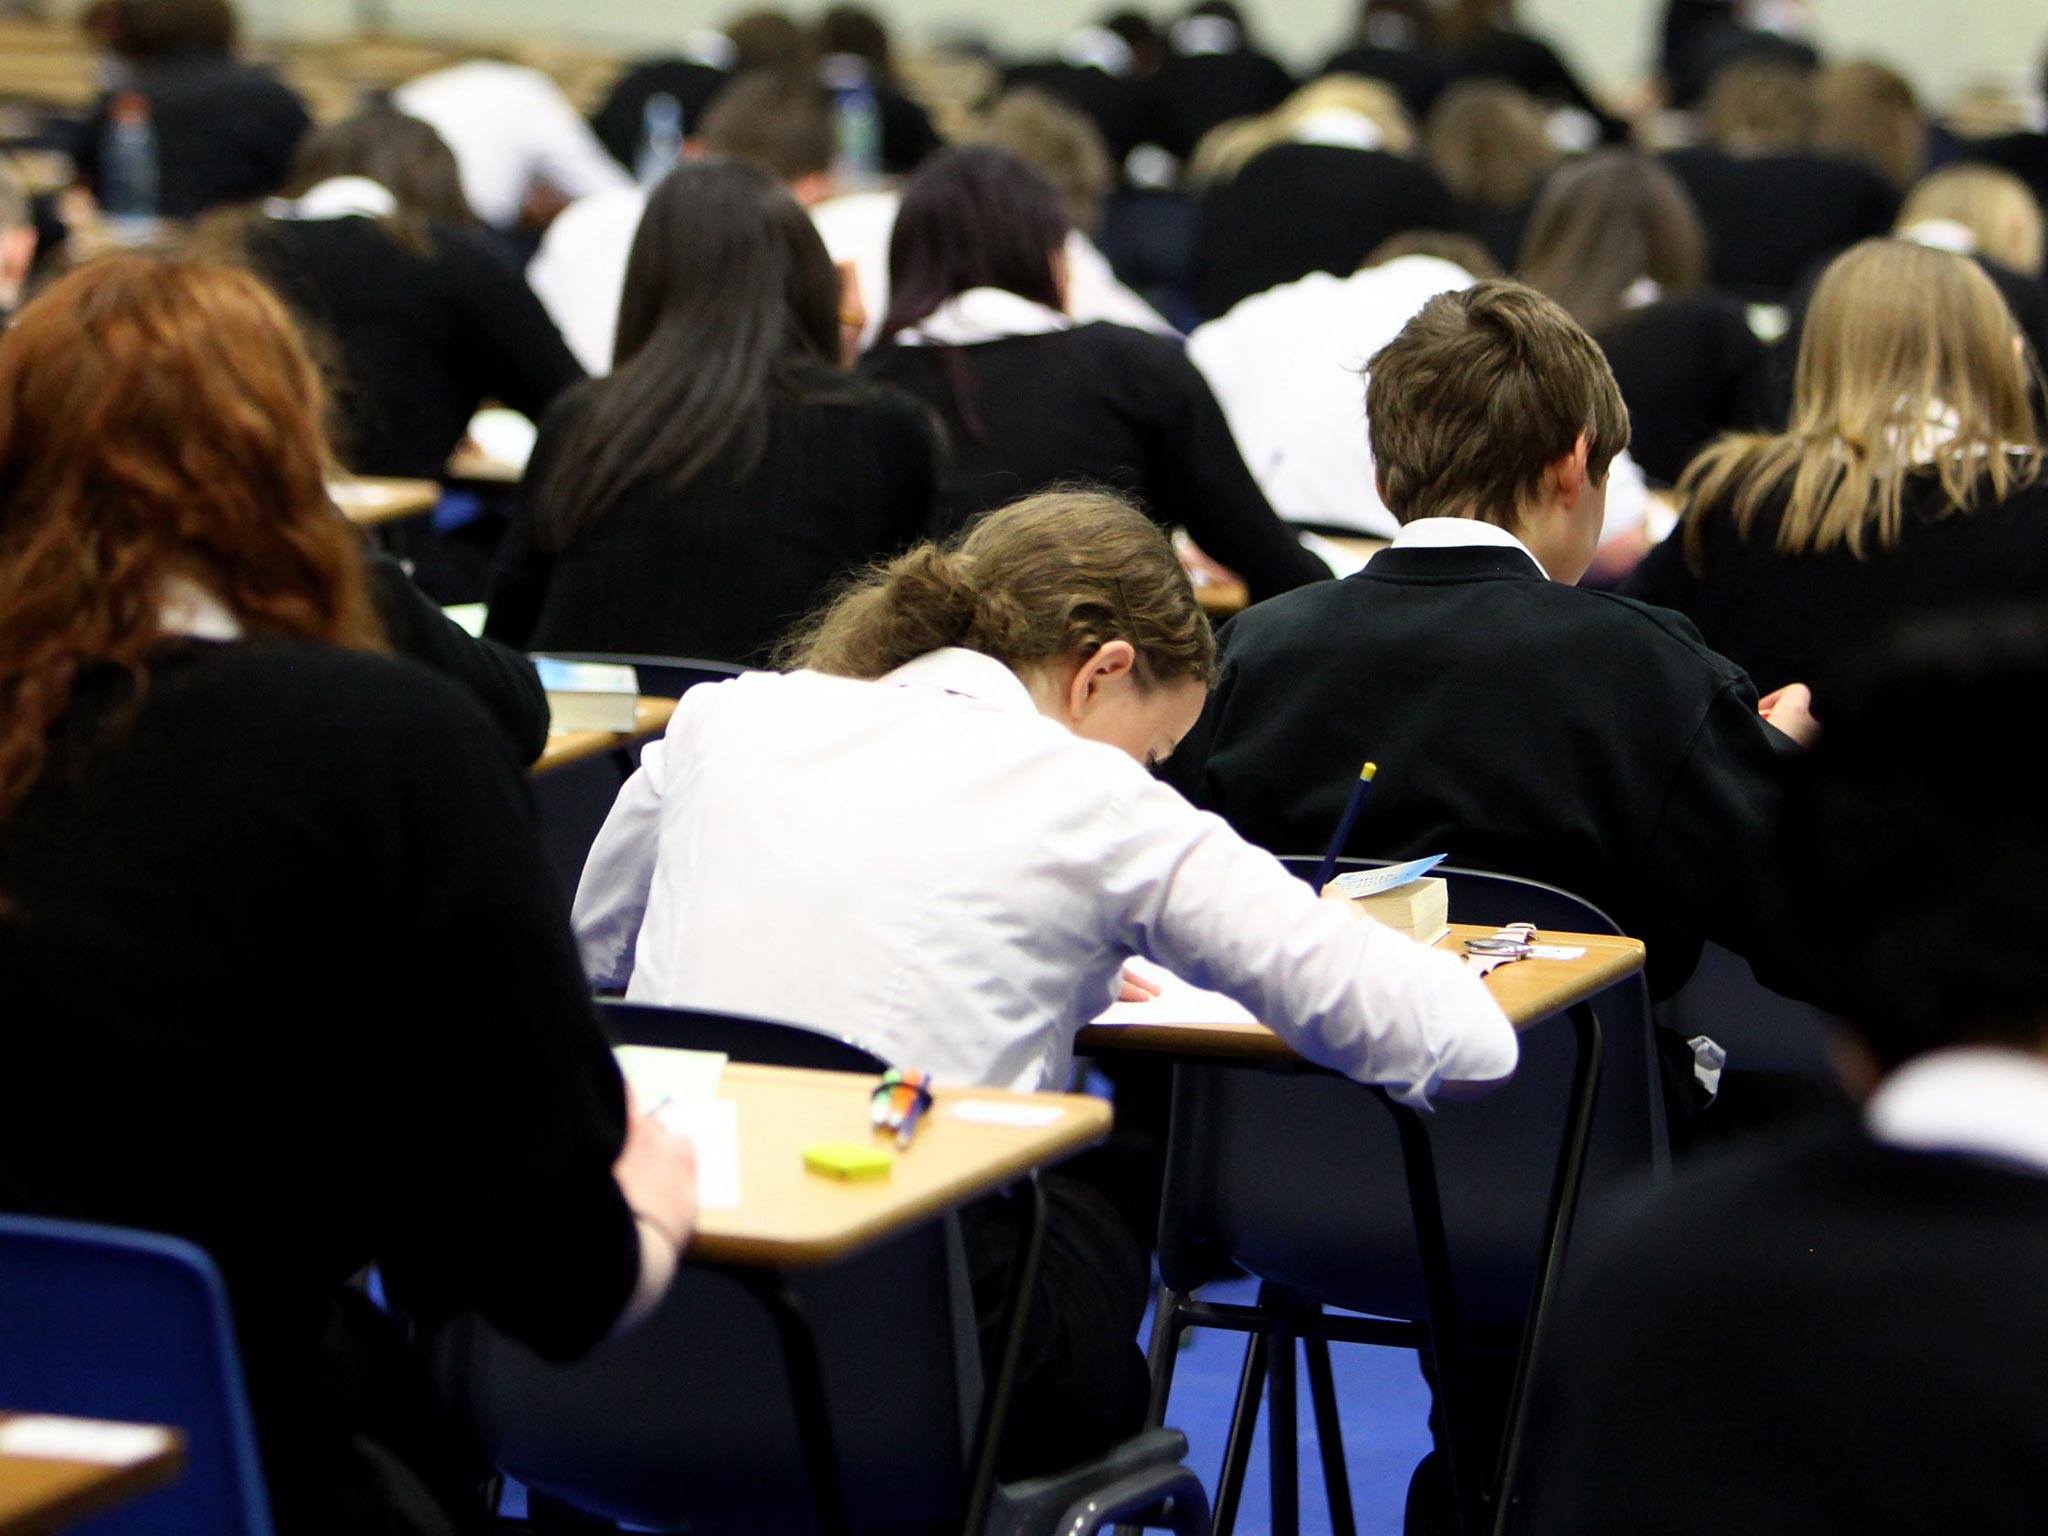 Pupils in an exam